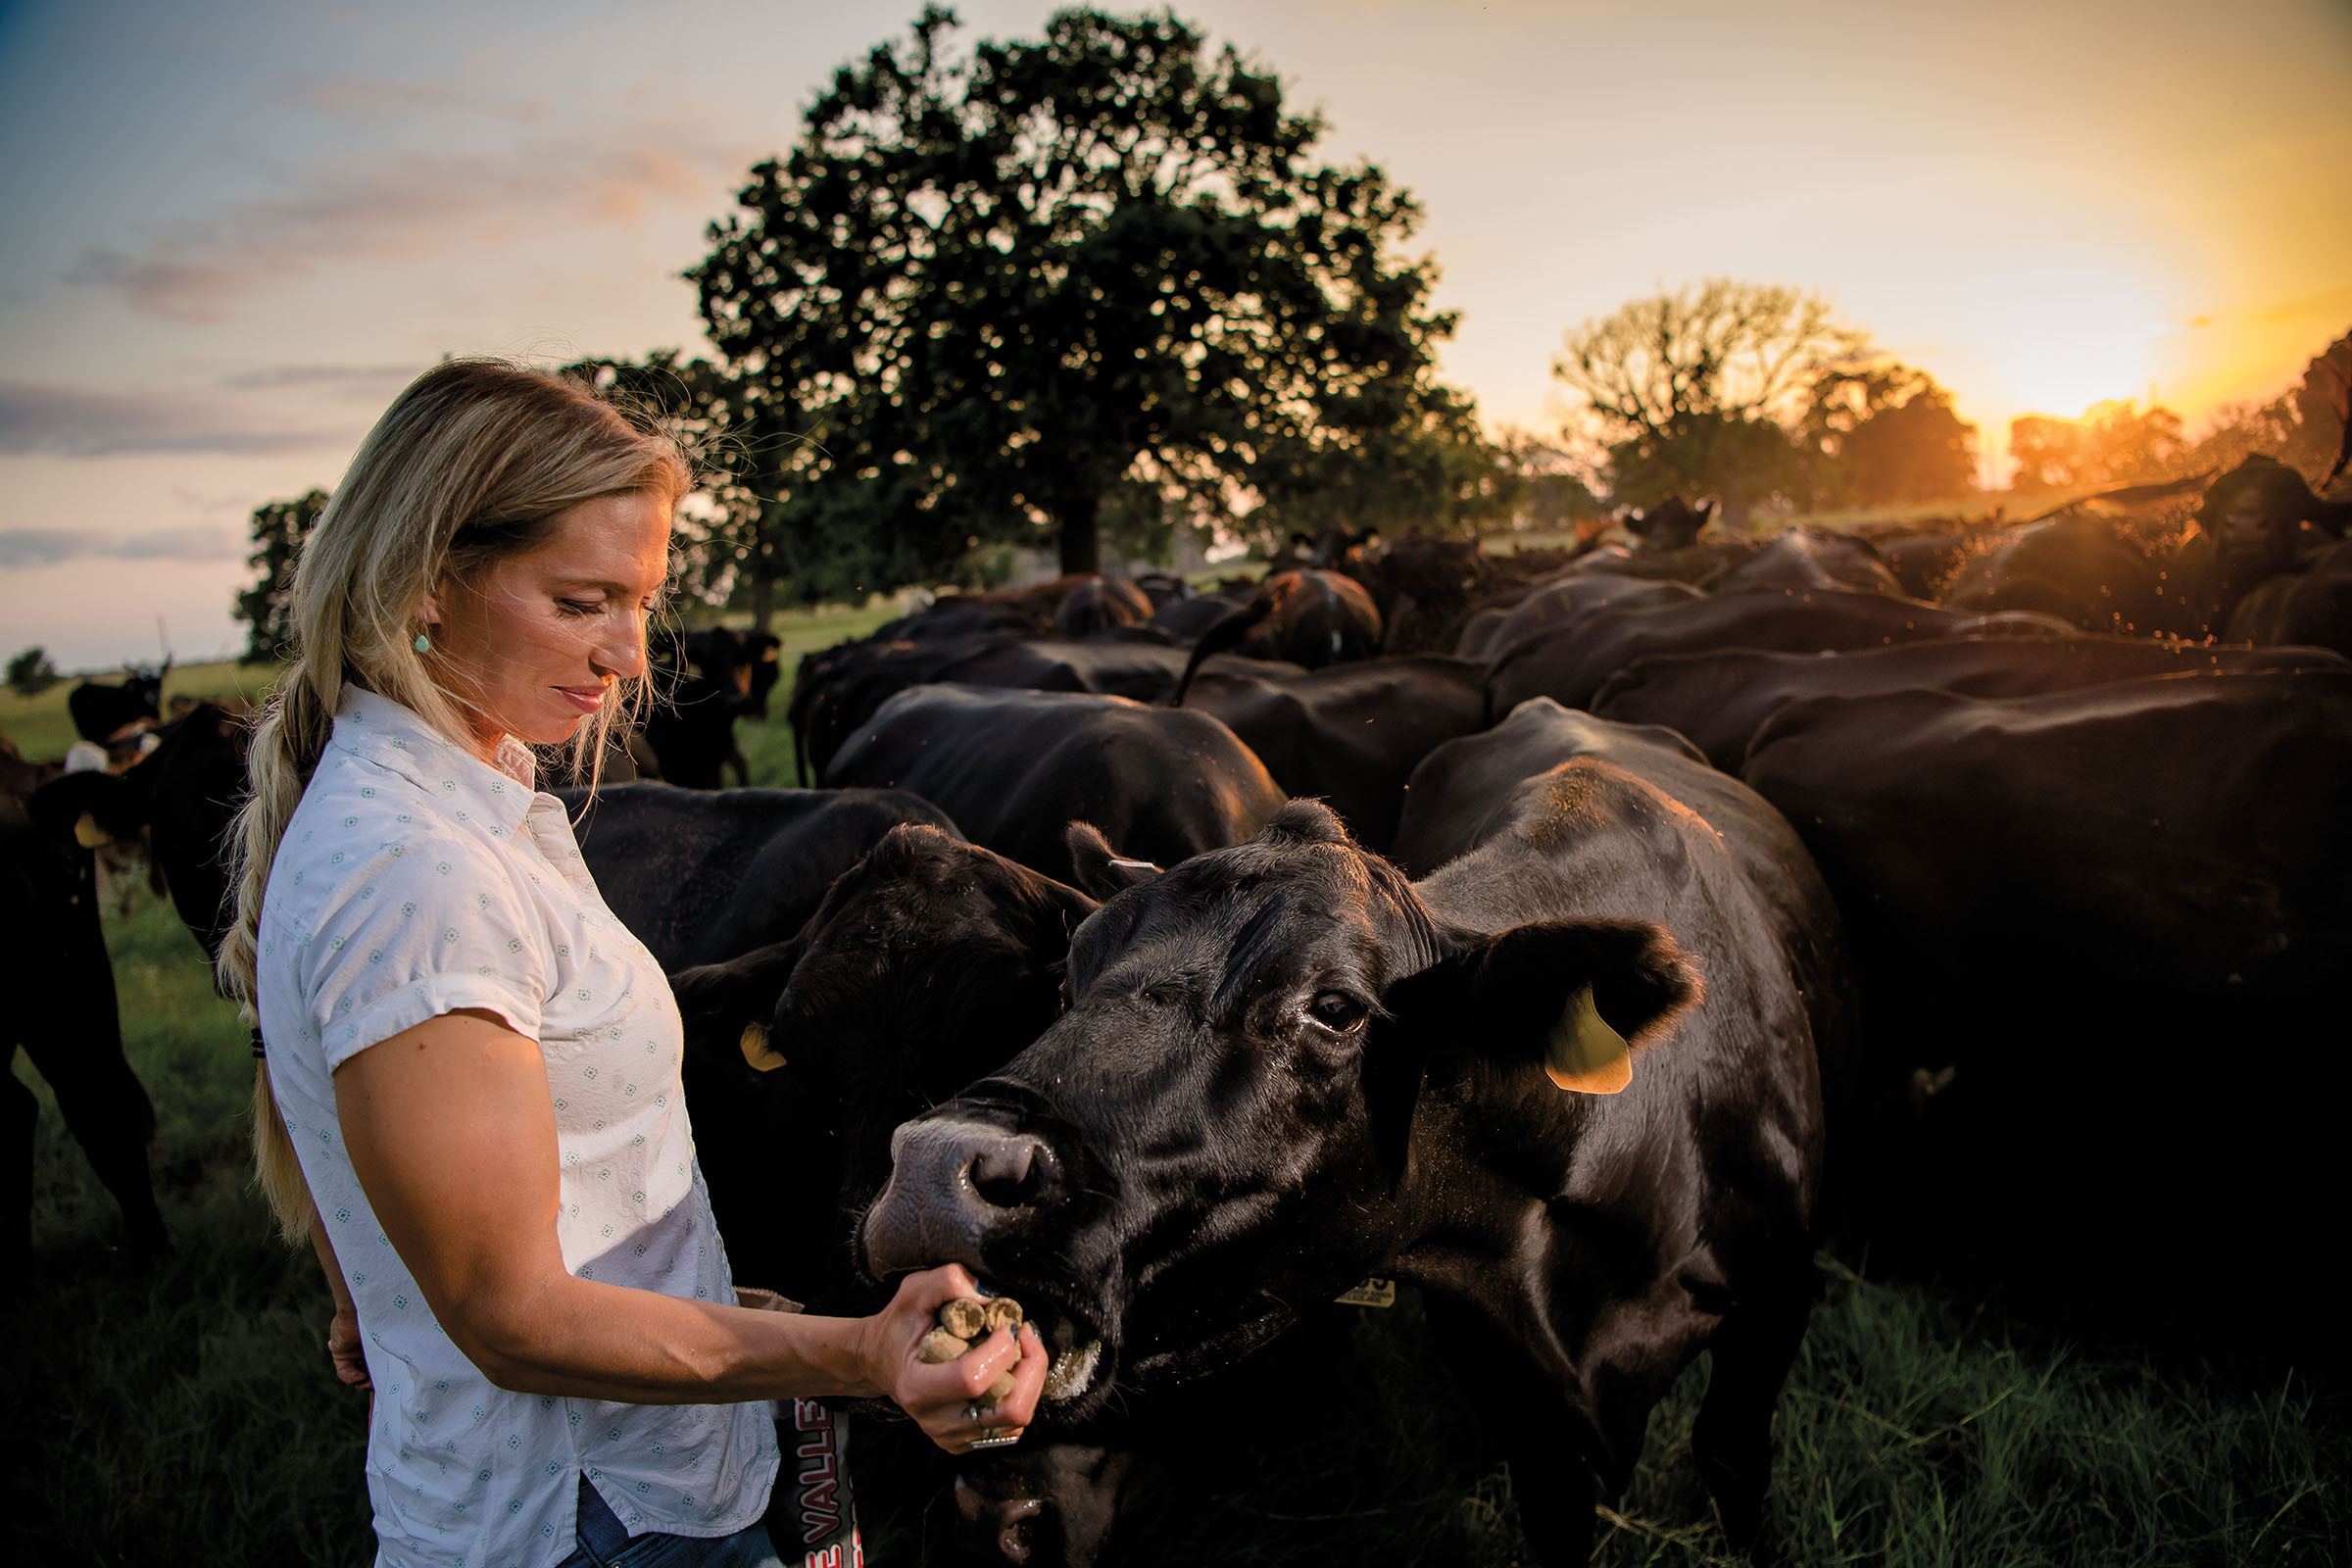 A woman feeds a cow from her hand in golden sunlight